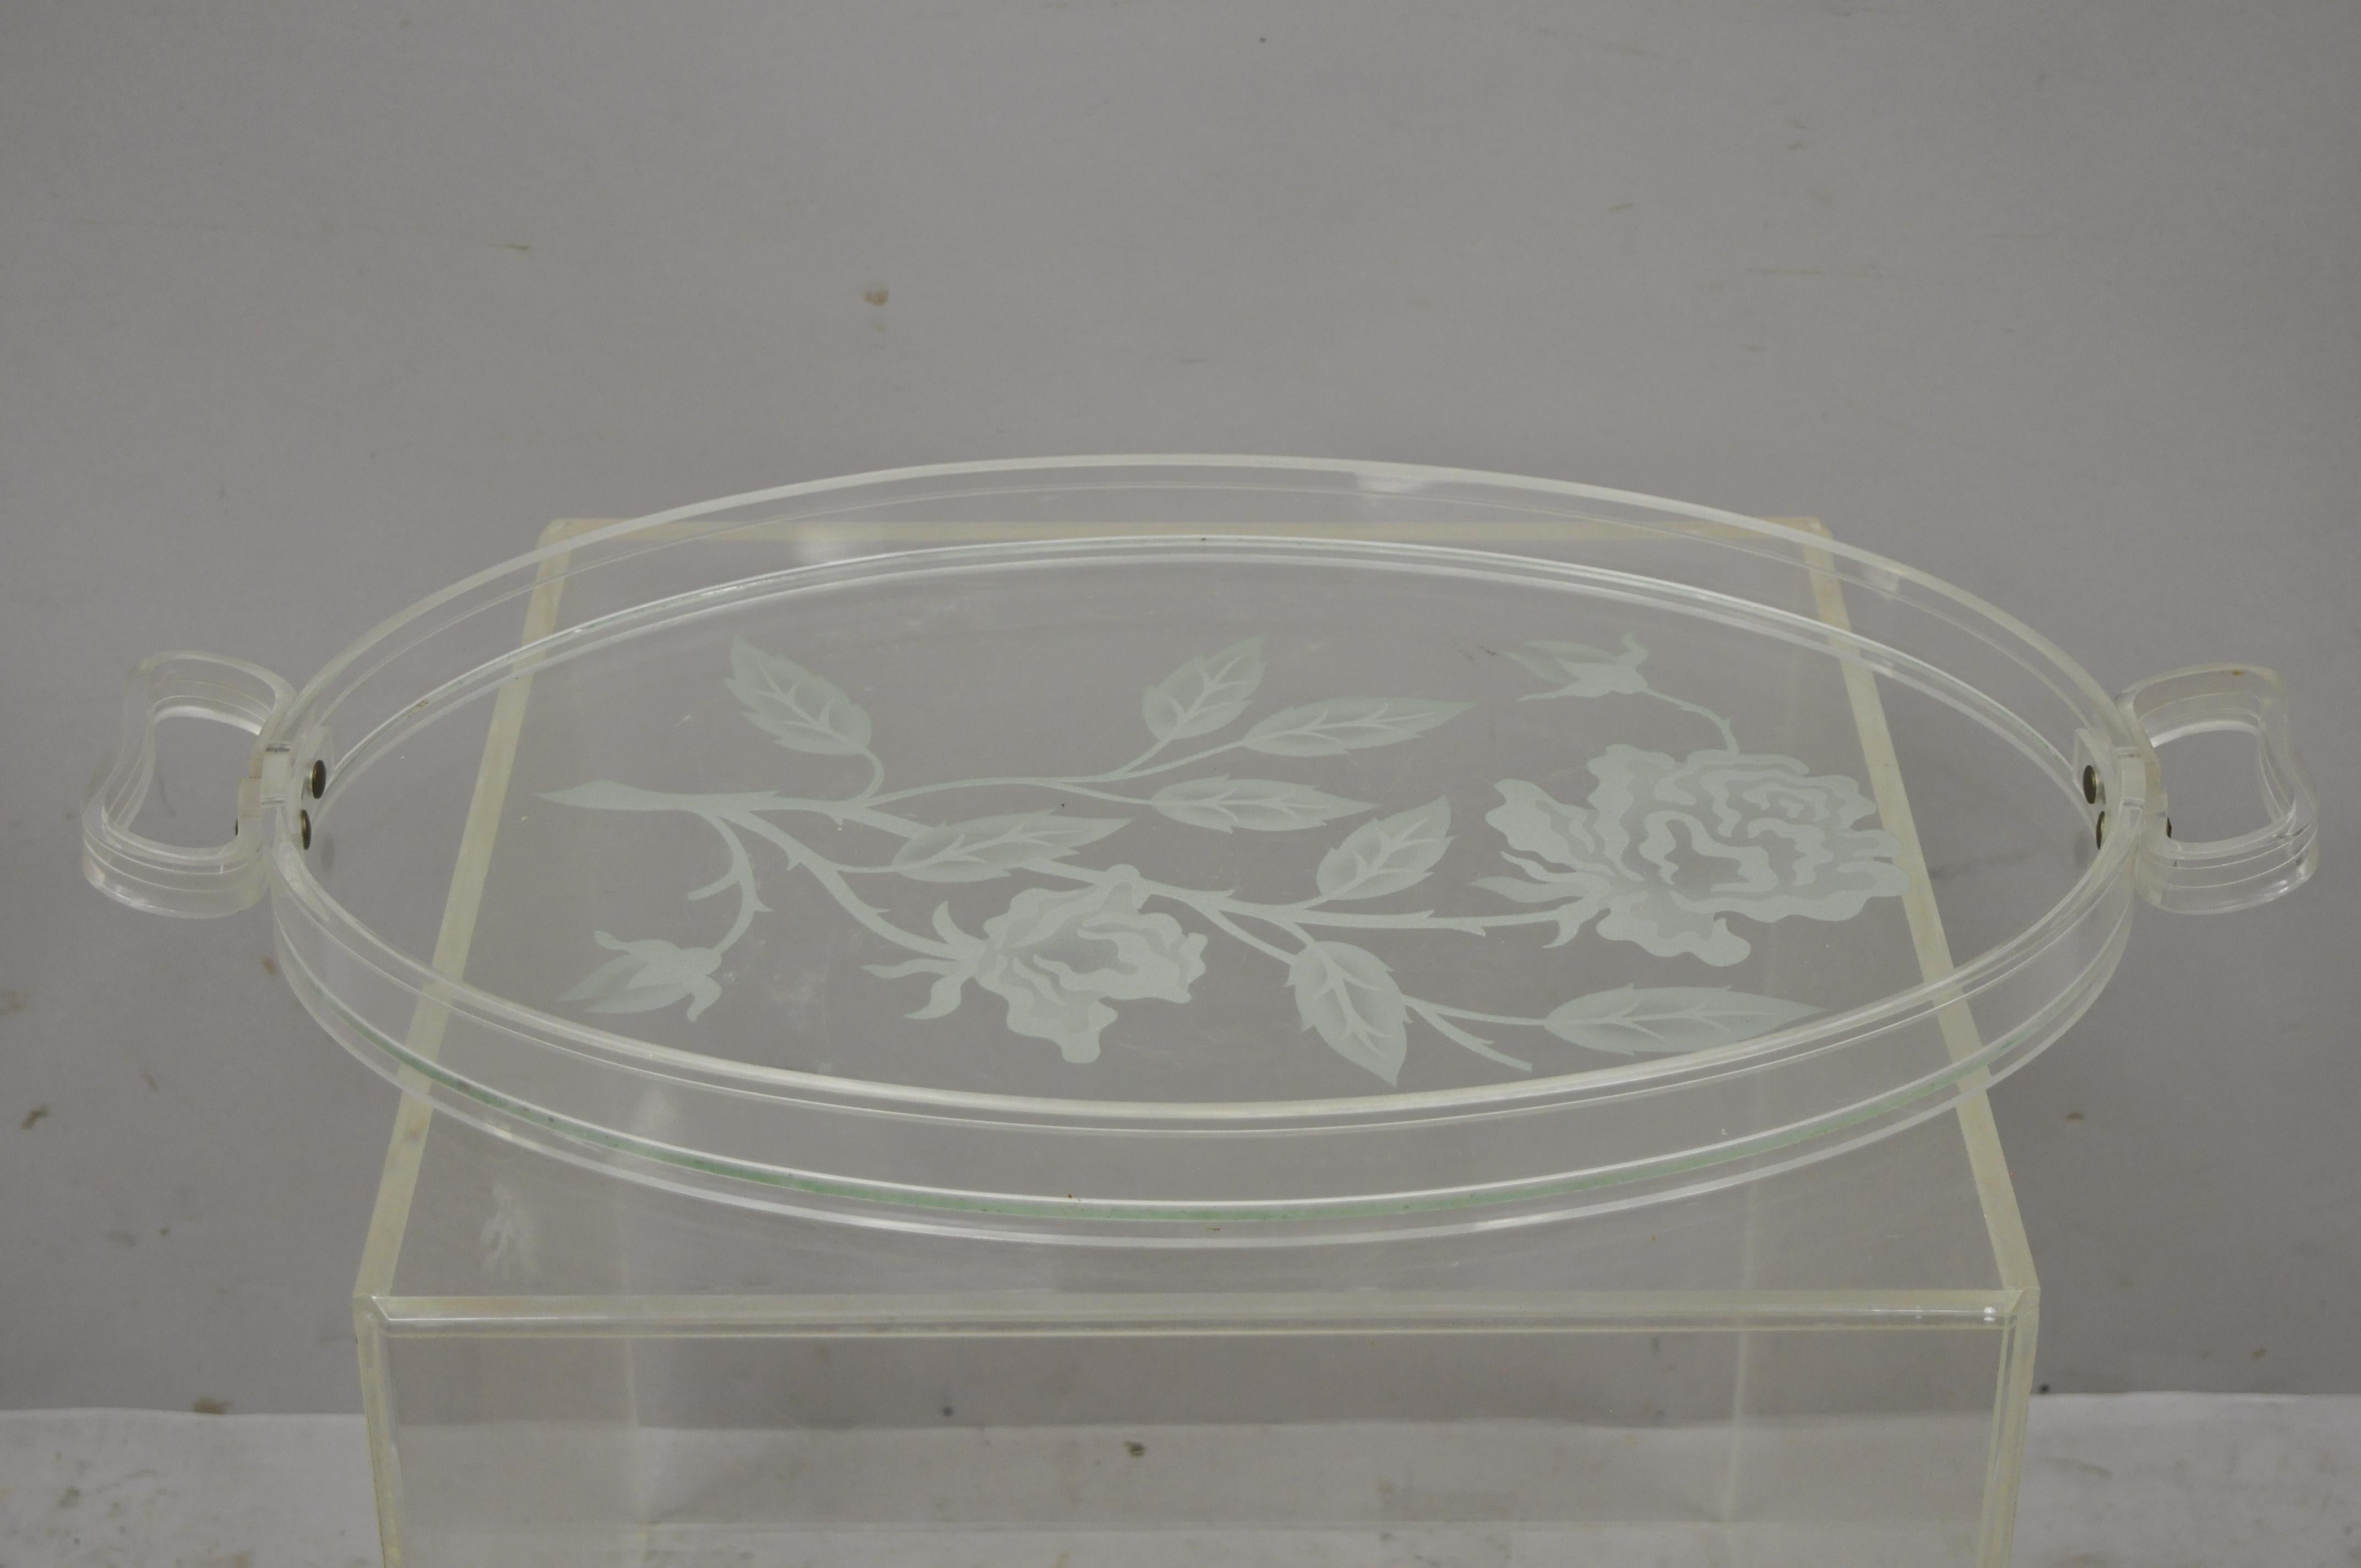 Dorothy Draper style Mid-Century Modern floral etched glass lucite serving tray platter. Item features floral etched glass tray, lucite/acrylic border/handles, great style and form, circa mid 20th century. Measurements: 1.75